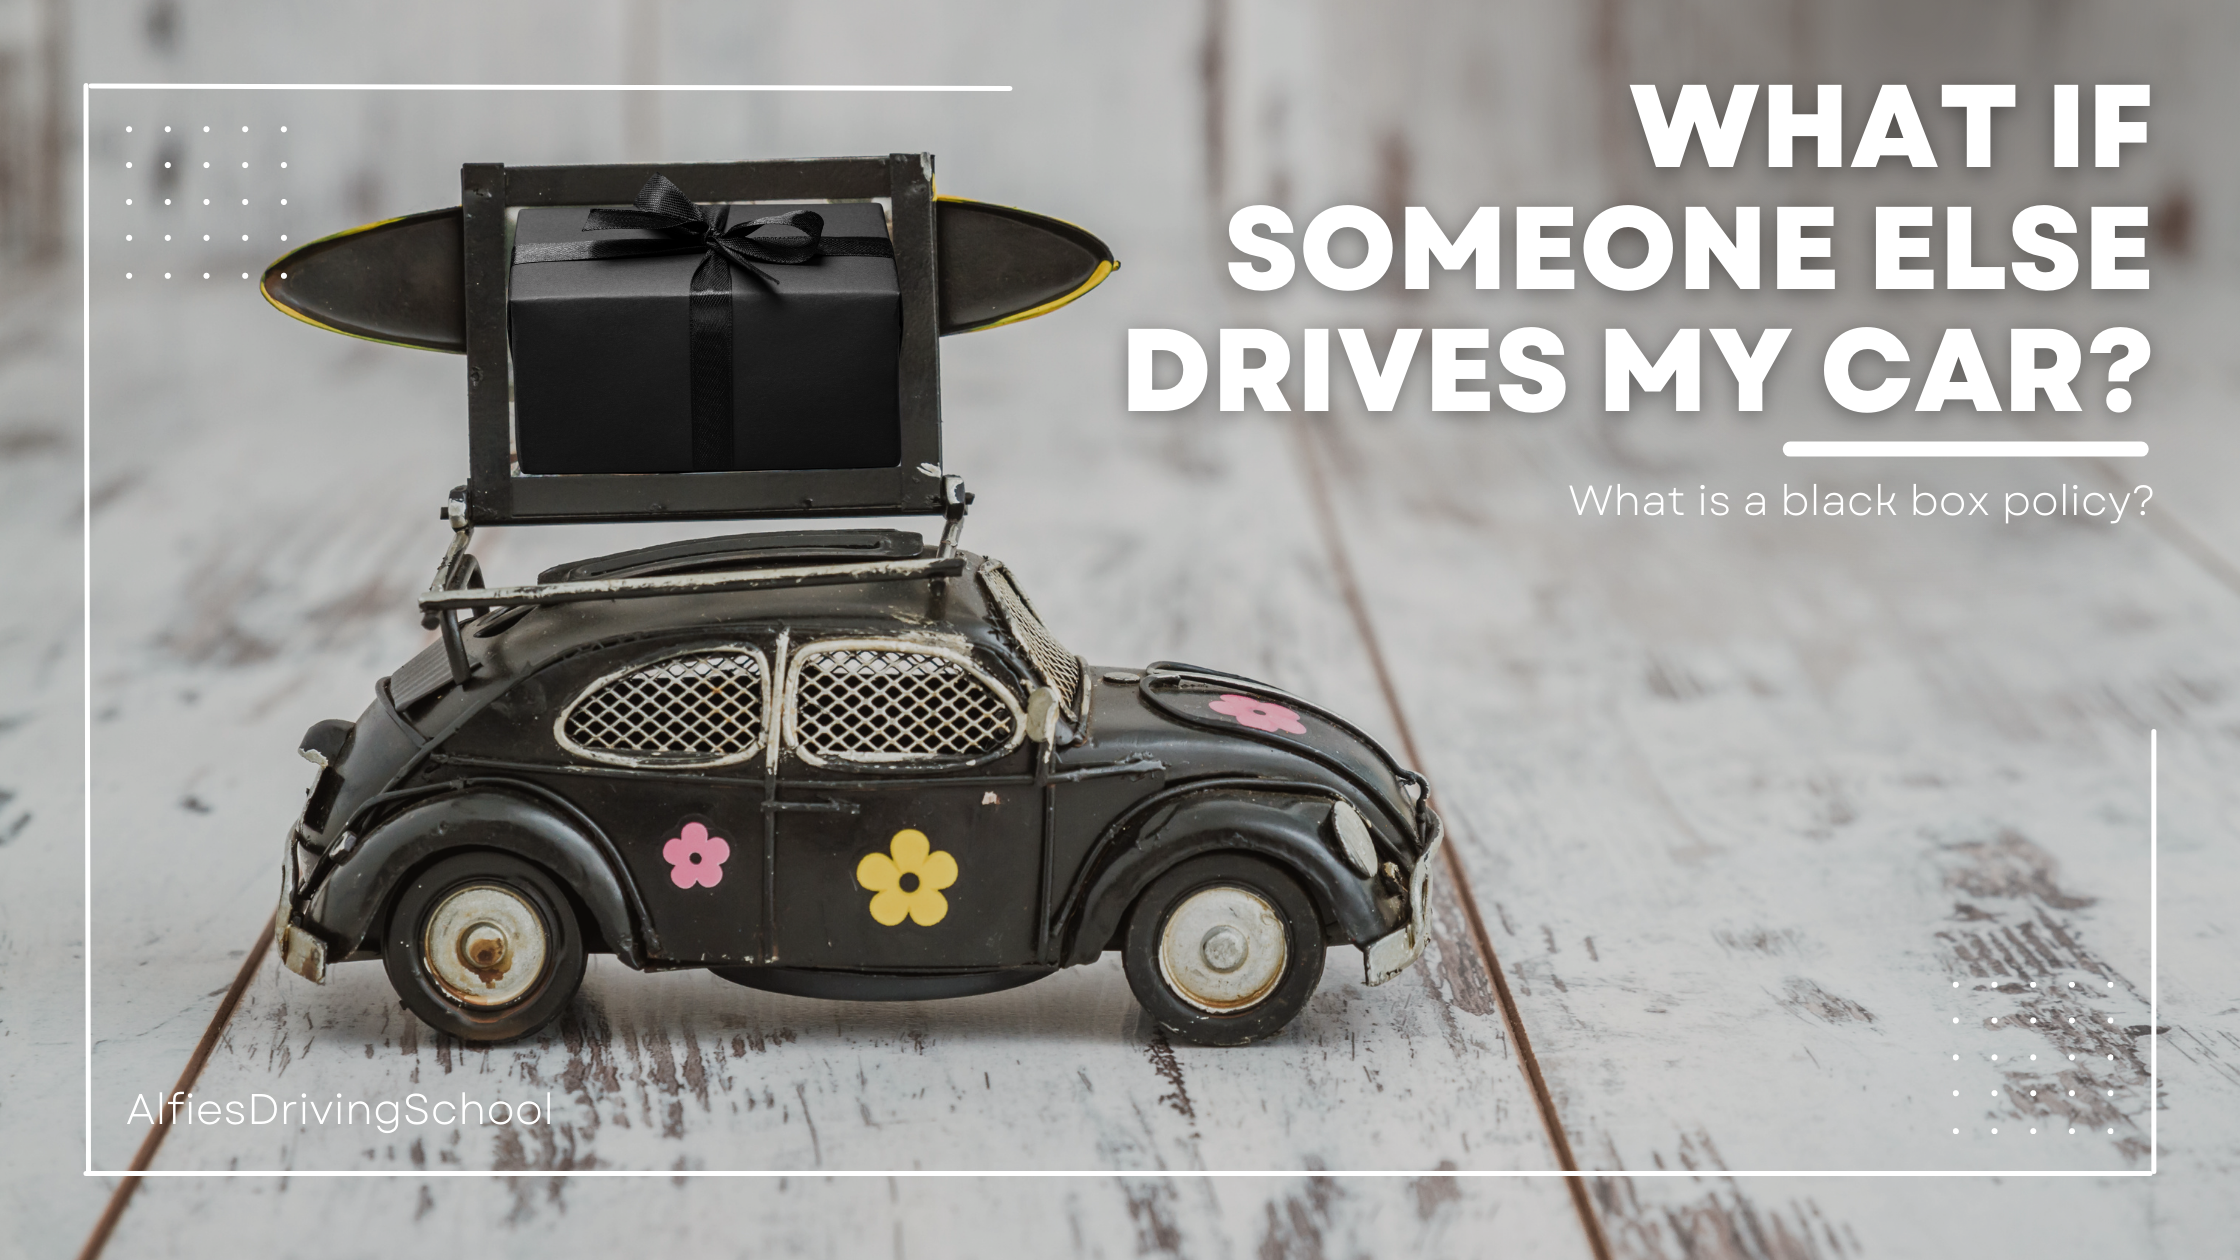 Black Box Policy: What if someone else drives my car